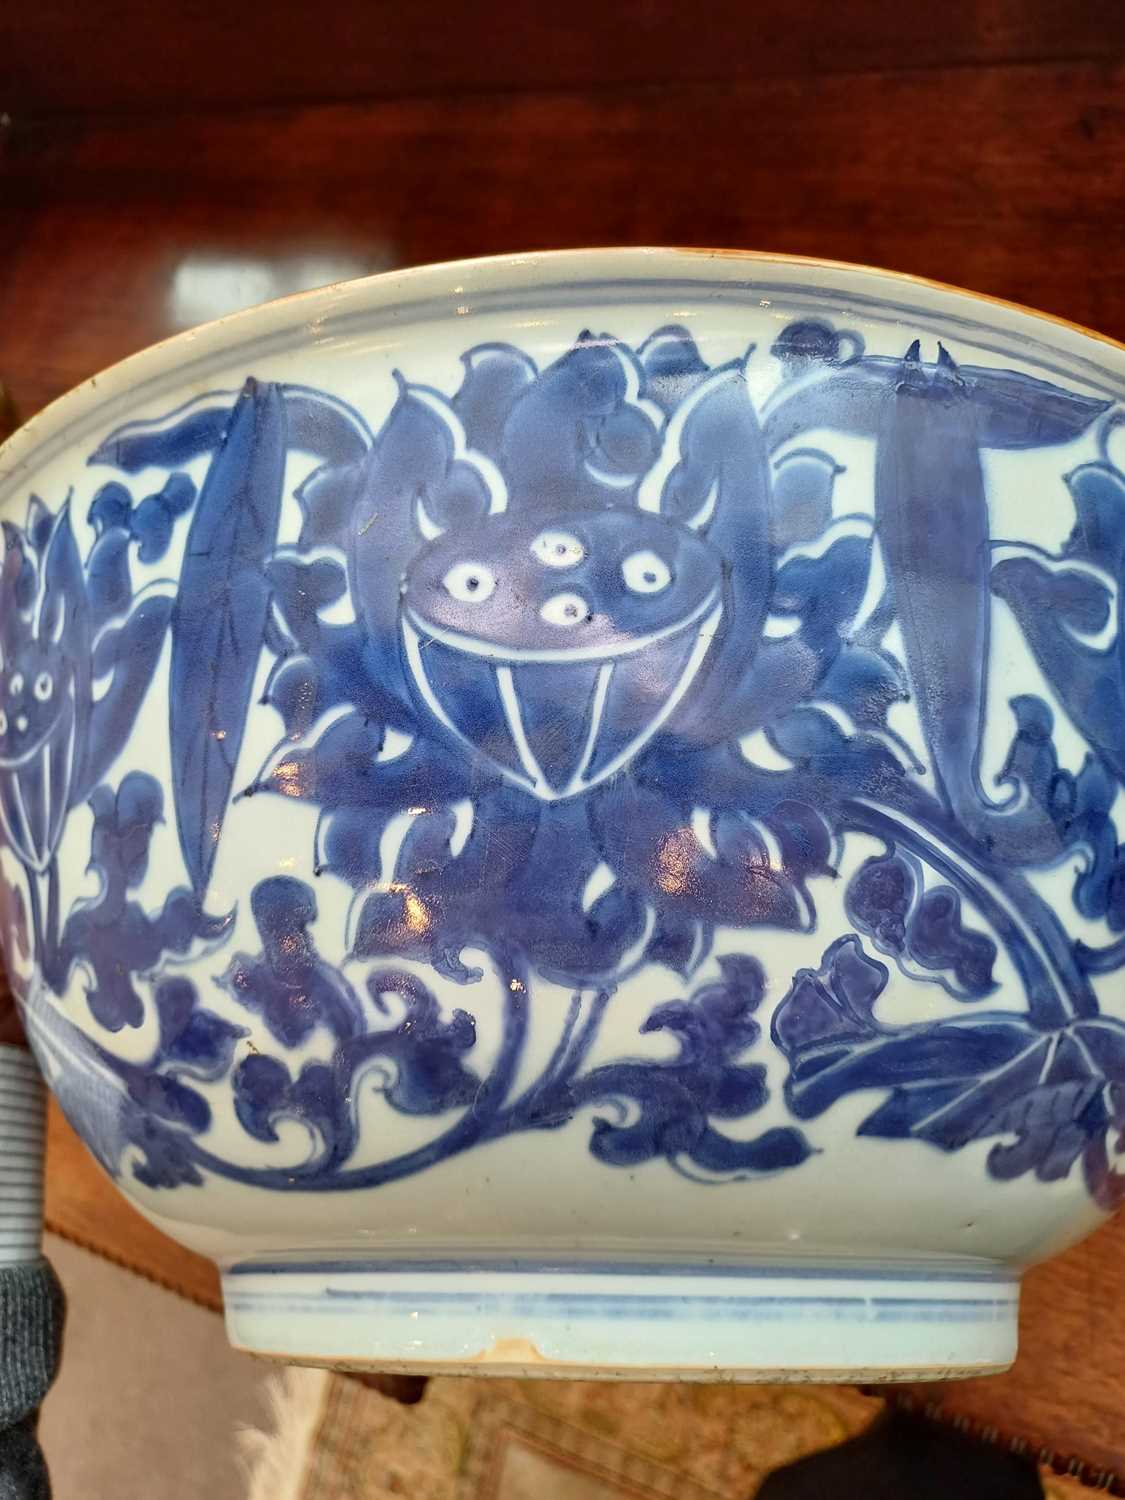 A Chinese Porcelain Punch Bowl, 19th century, with everted rim edged in copper glaze, painted in - Image 7 of 8